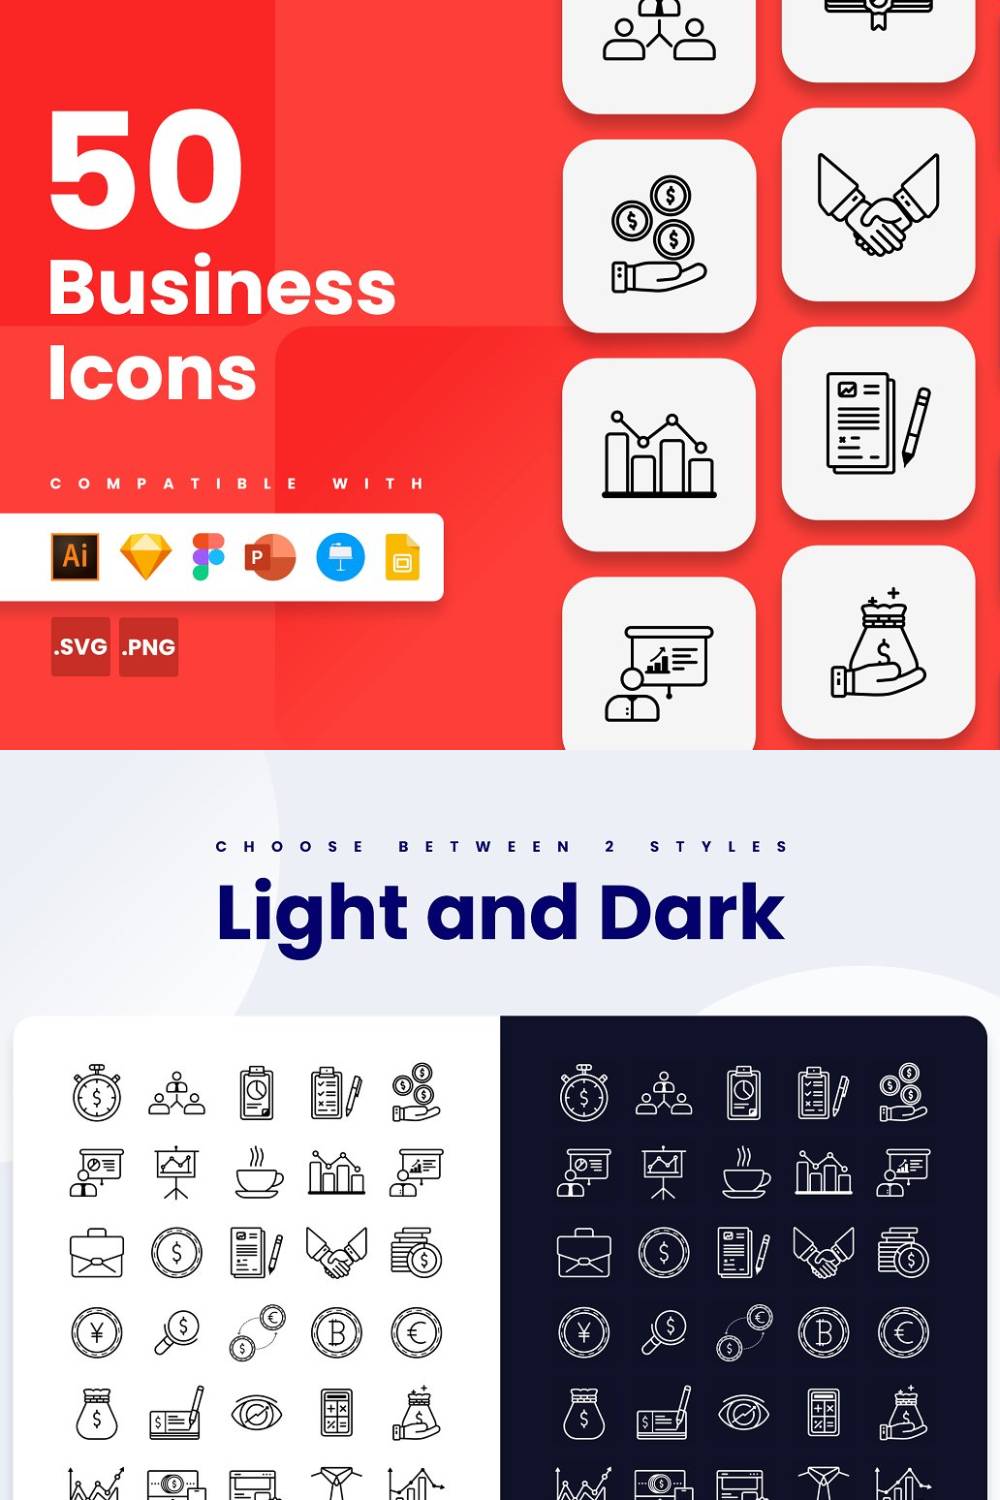 Business Icons Pinterest Cover.